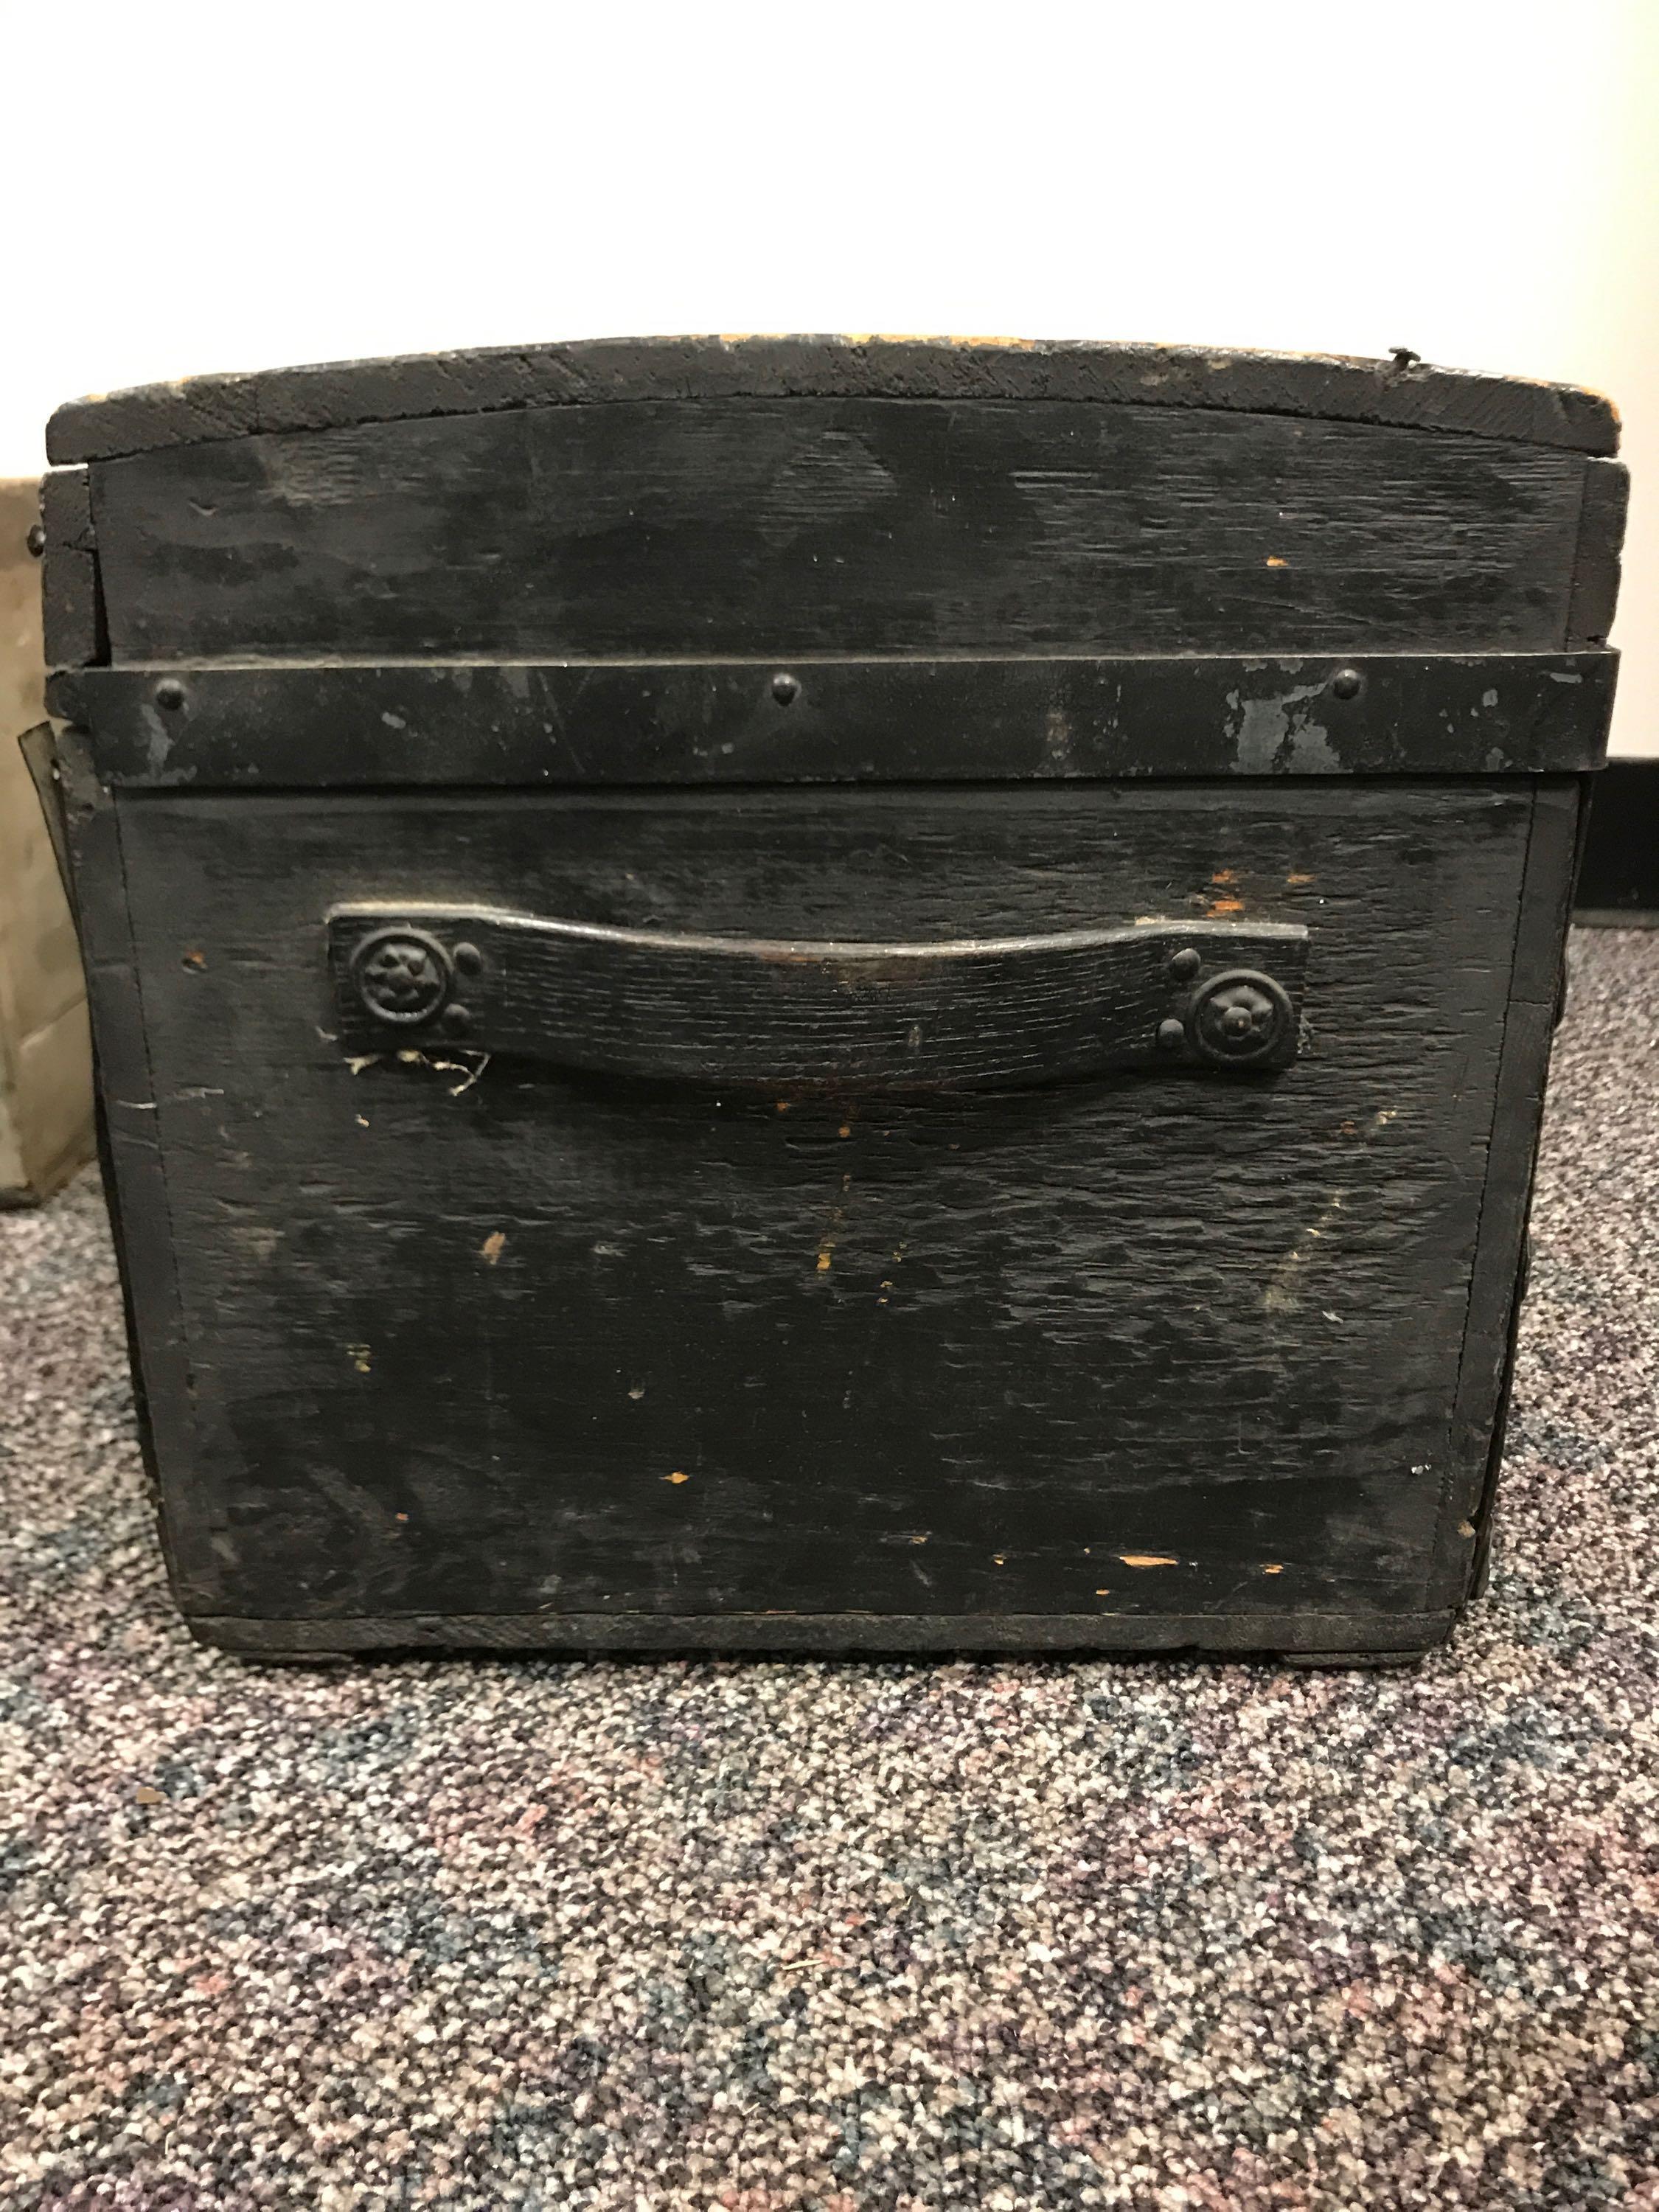 Group of 5 Antique Wooden Crates Trunk Chair Trunk